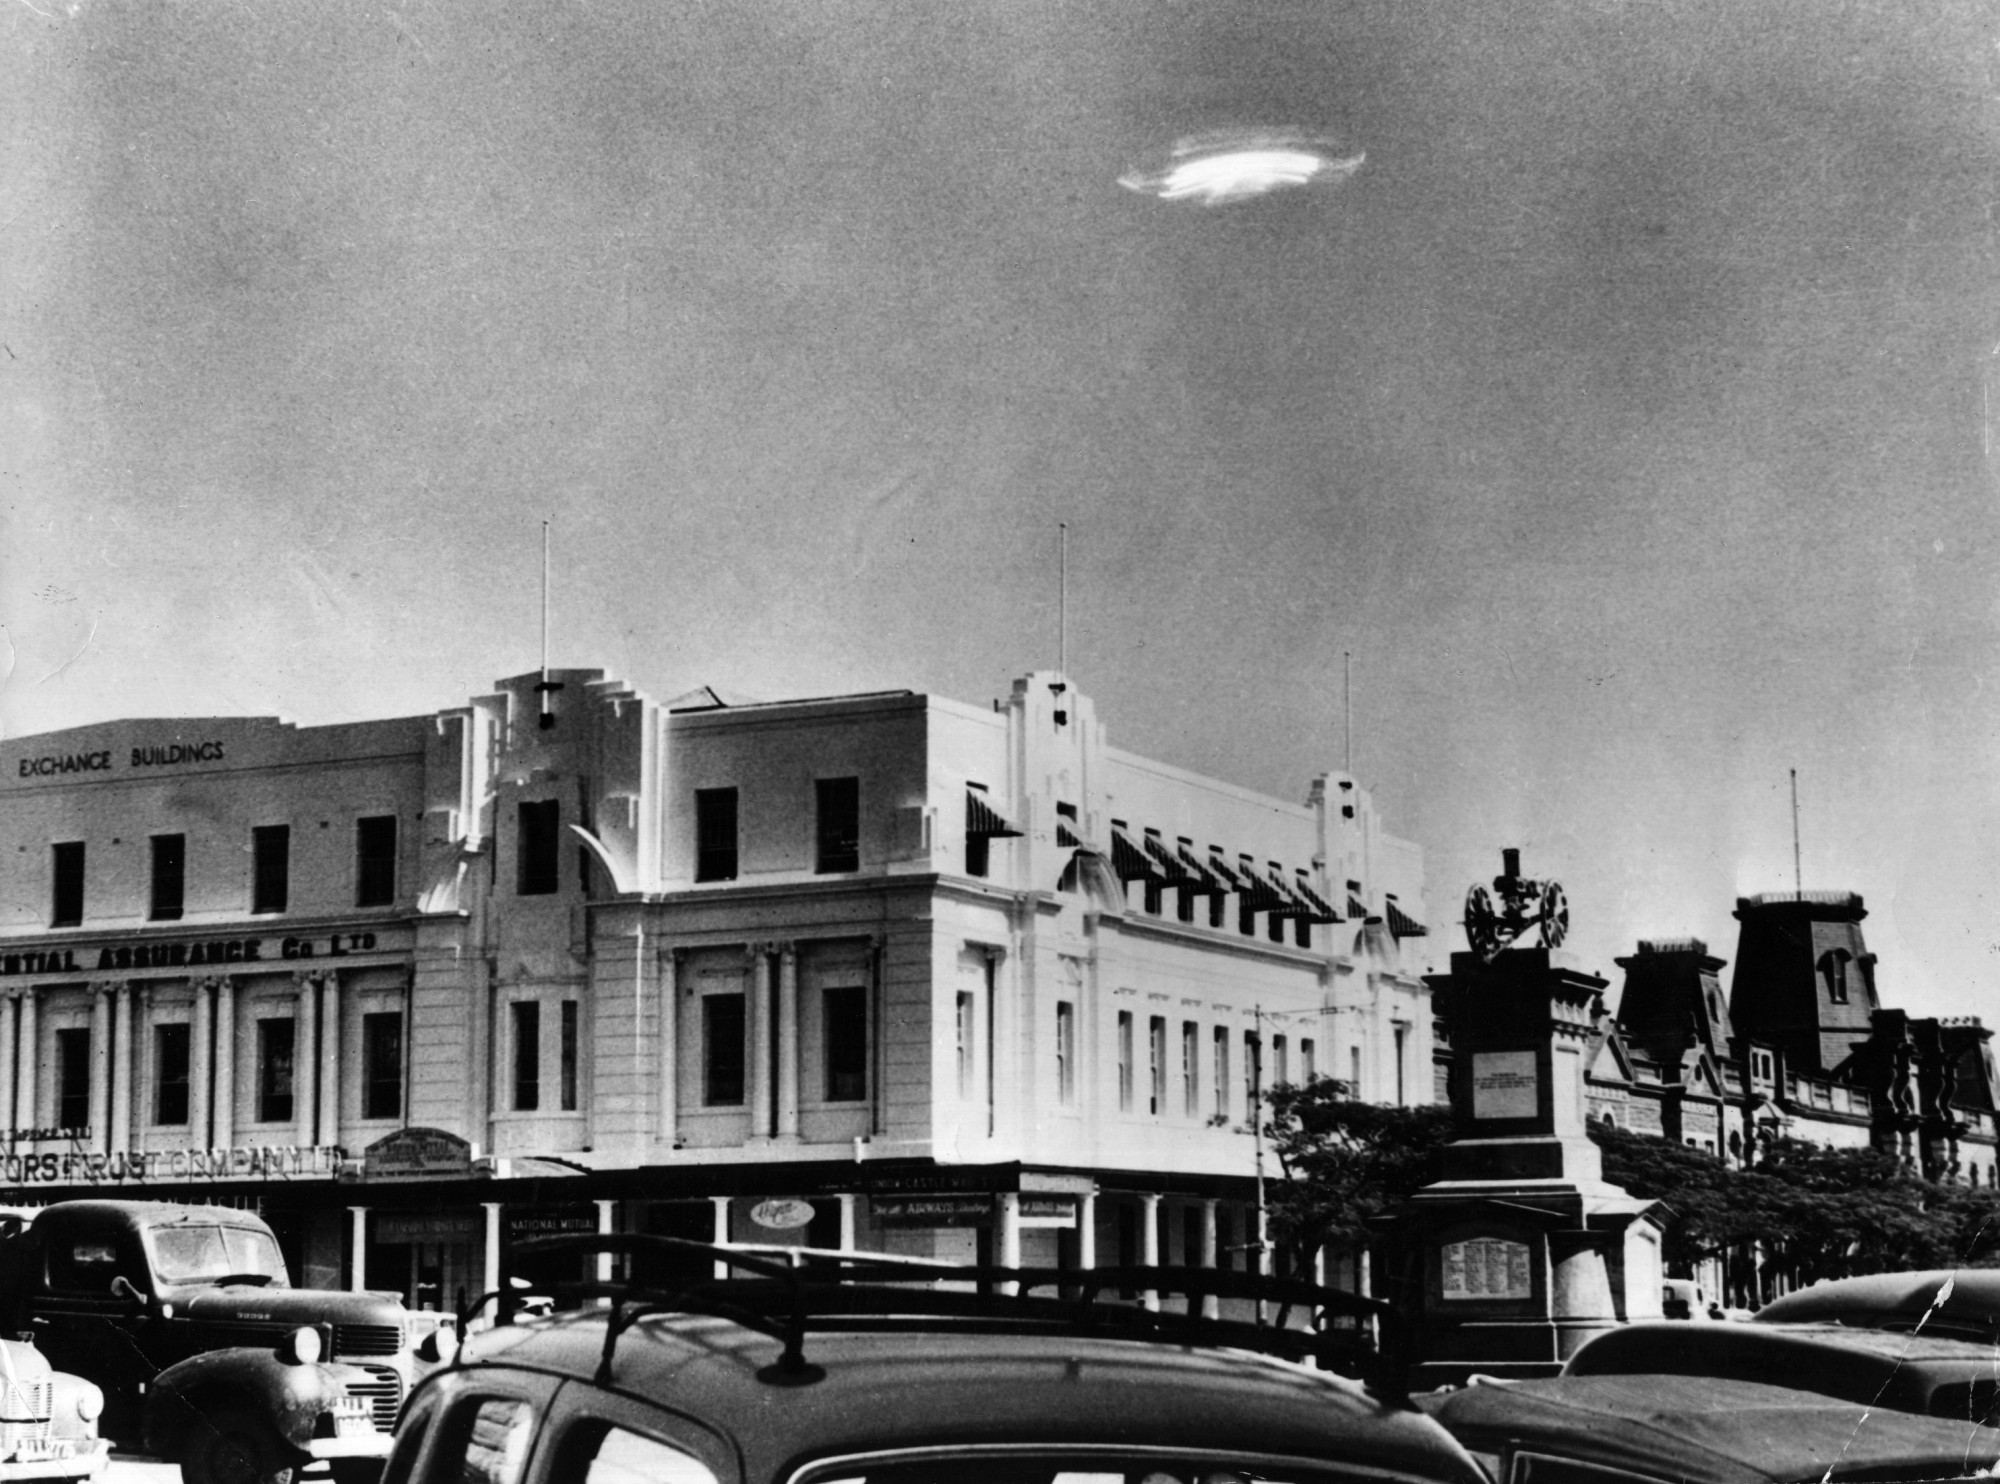 UFO Investigations Expert Claims They Could Soon Have ‘Definitive Conclusions’ on UFO Origins